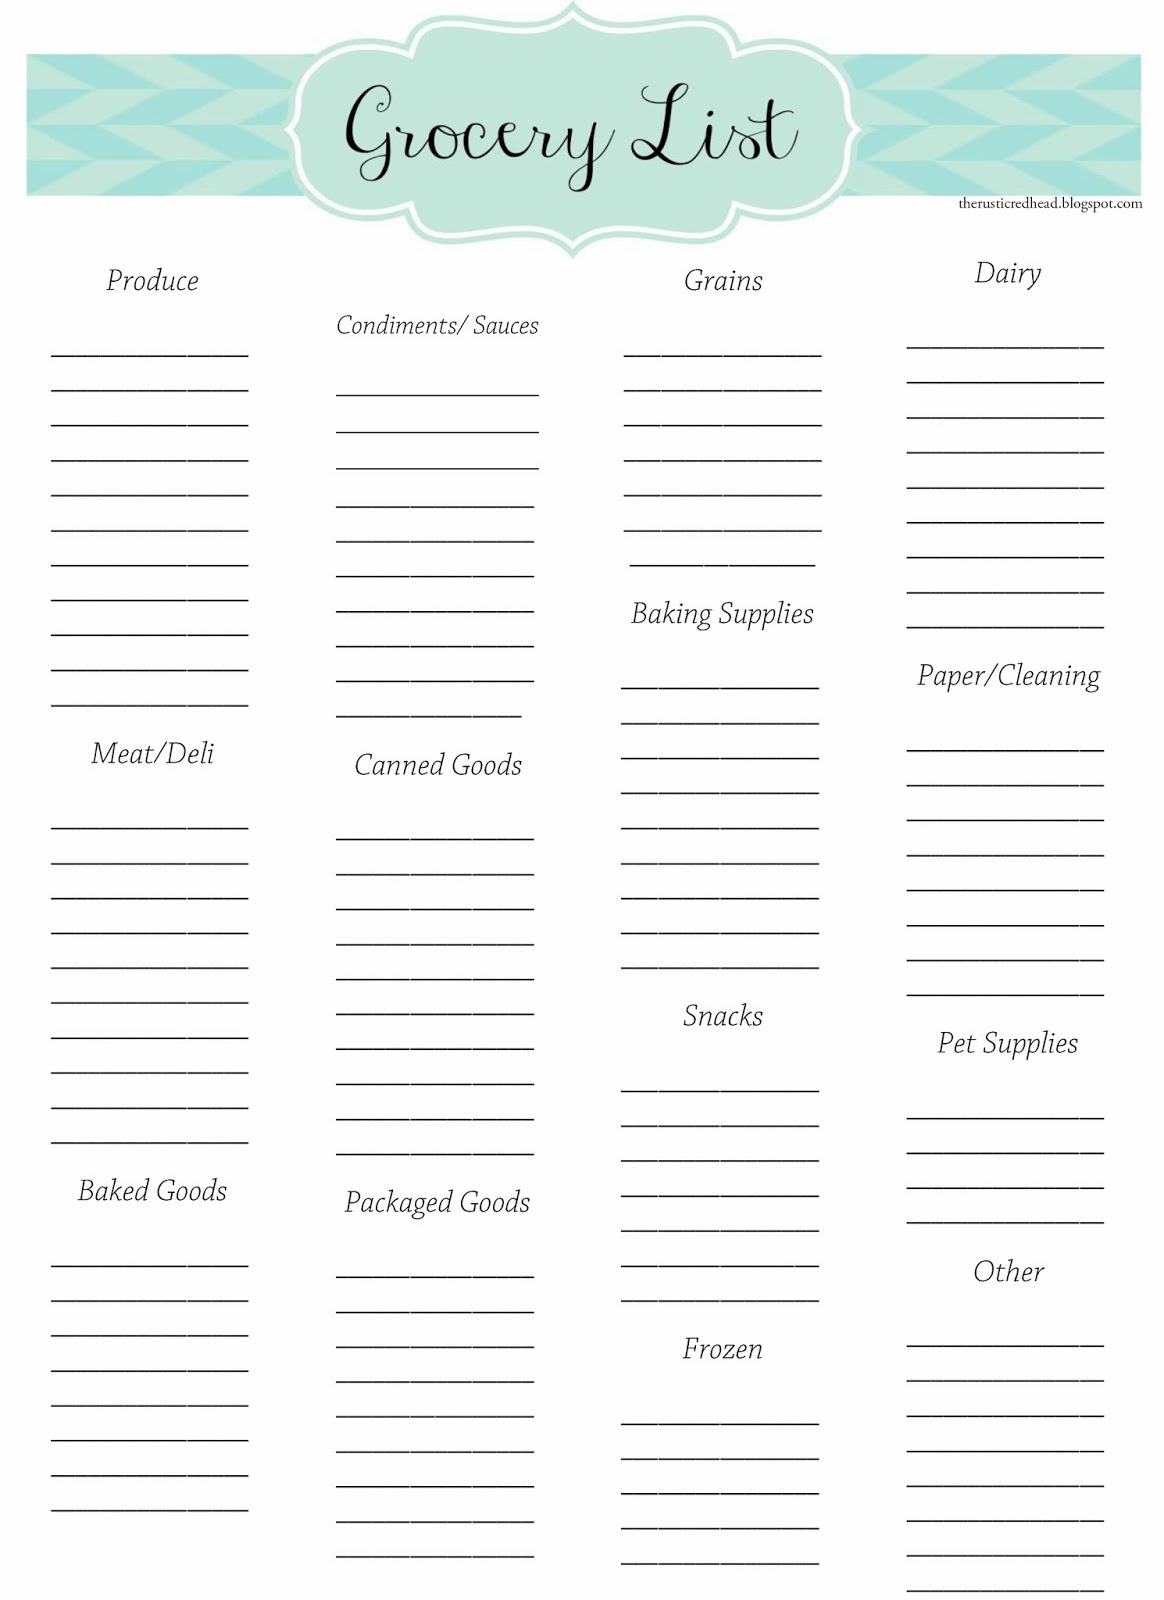 Weekly Menu Planner Template With Shopping List